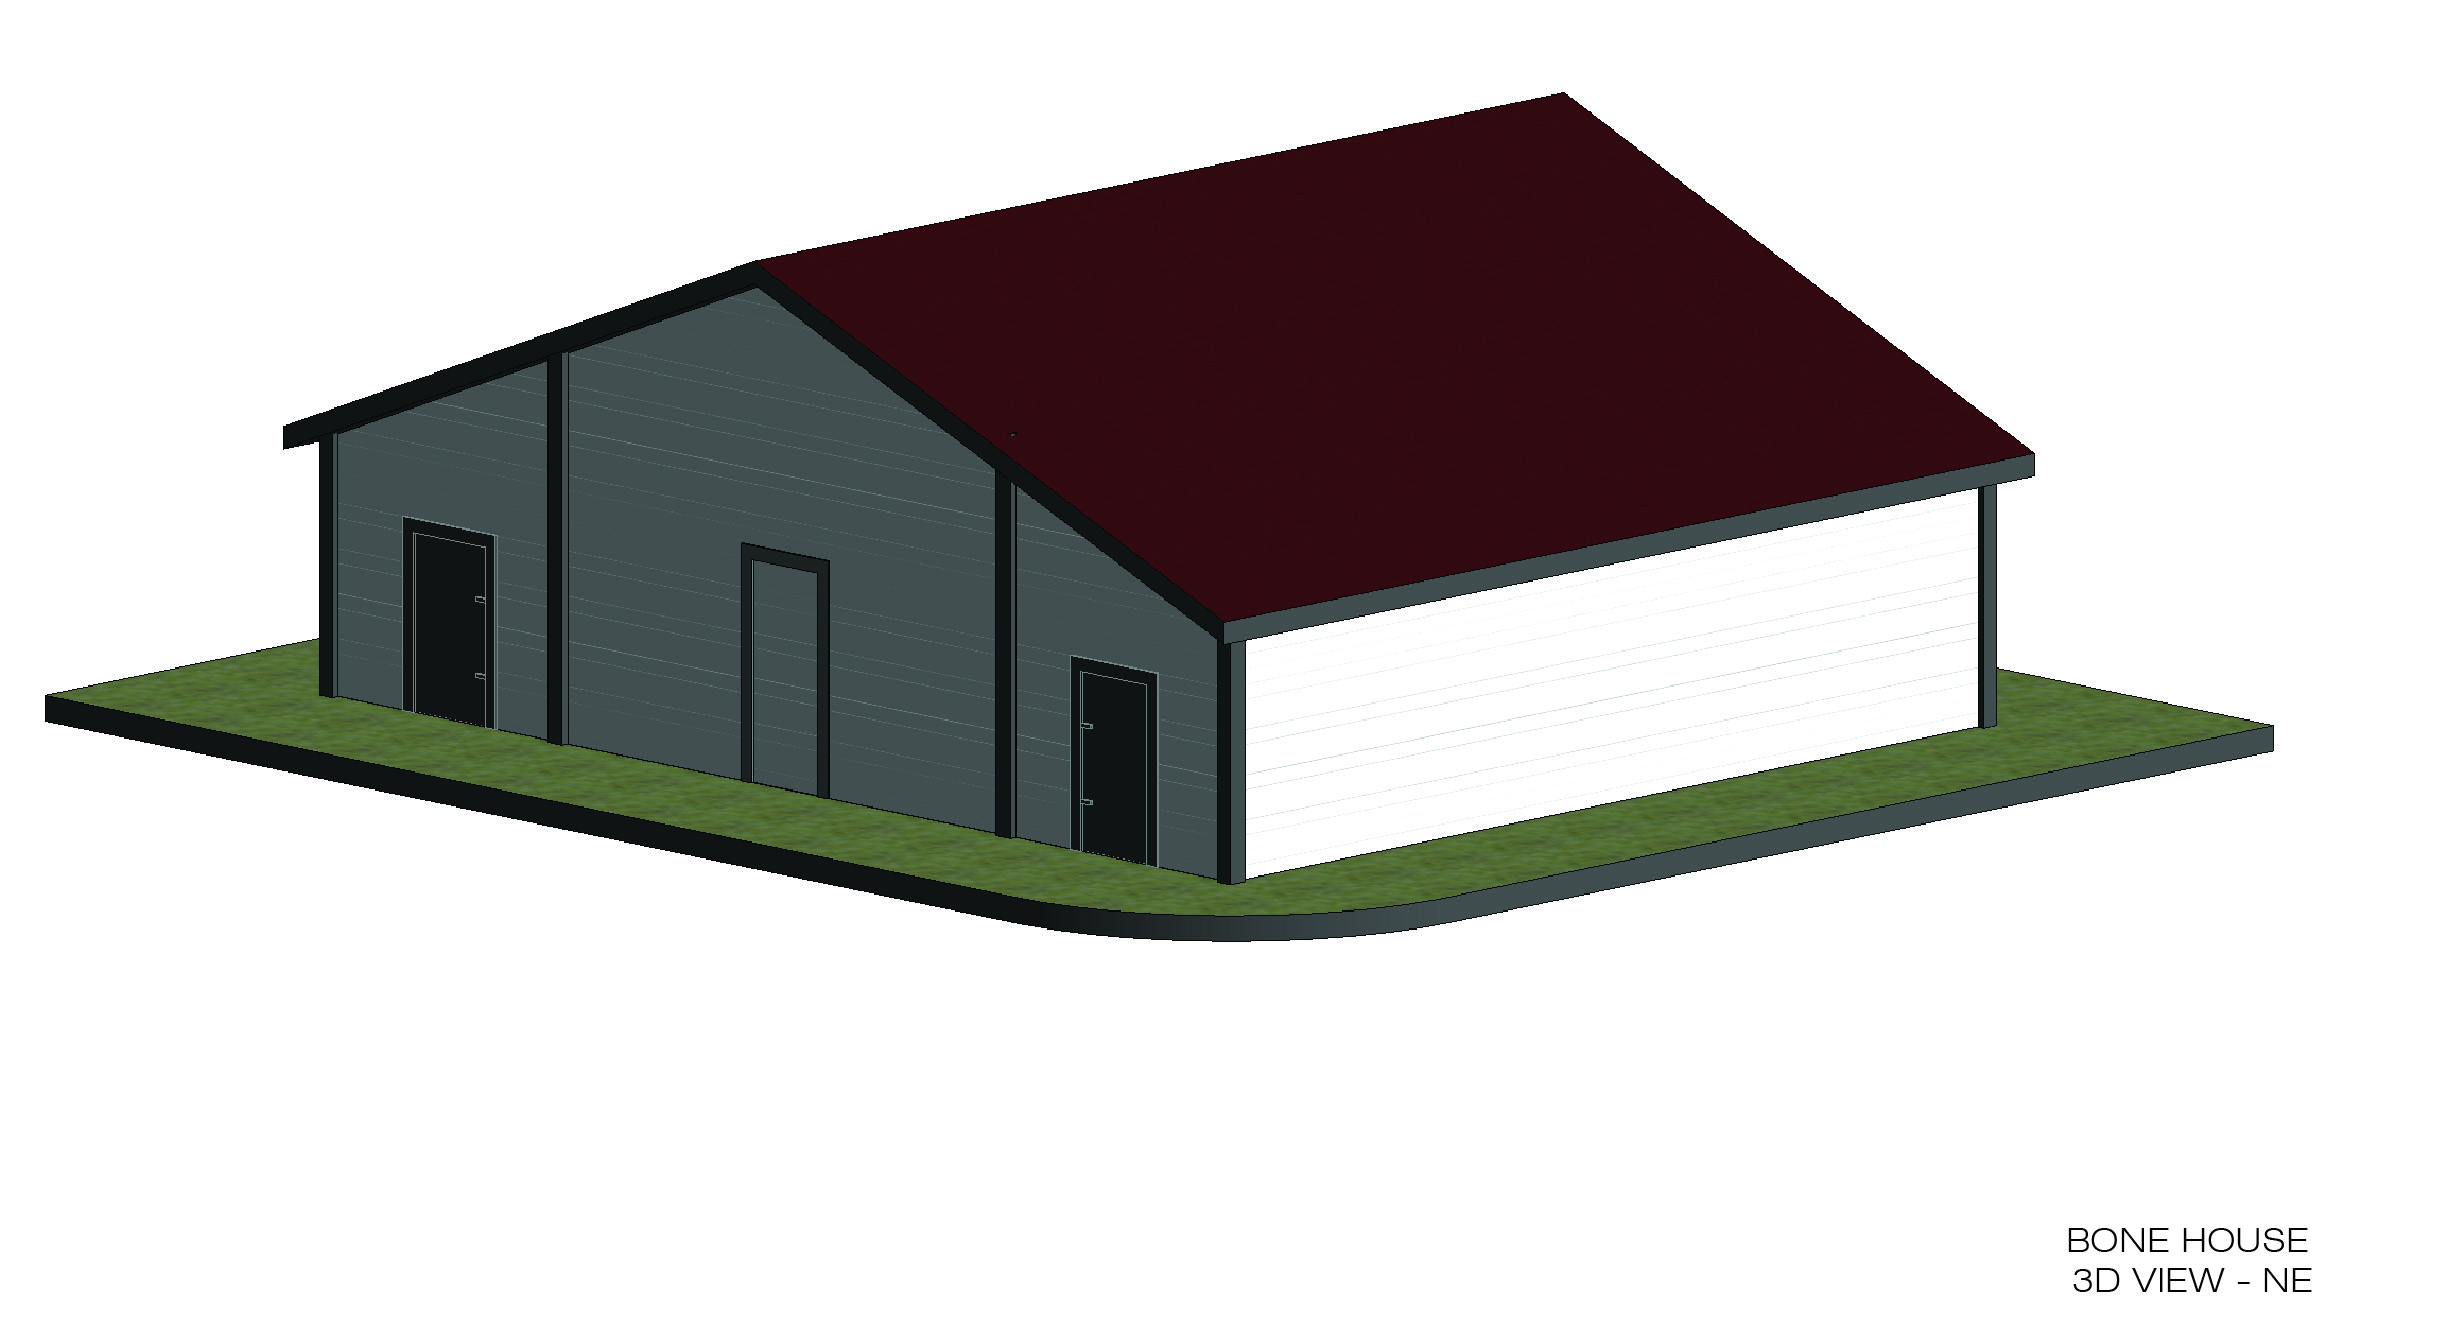 Northeast view of 3D model created in Revit from the laser scanning data collected of the Bonehouse.